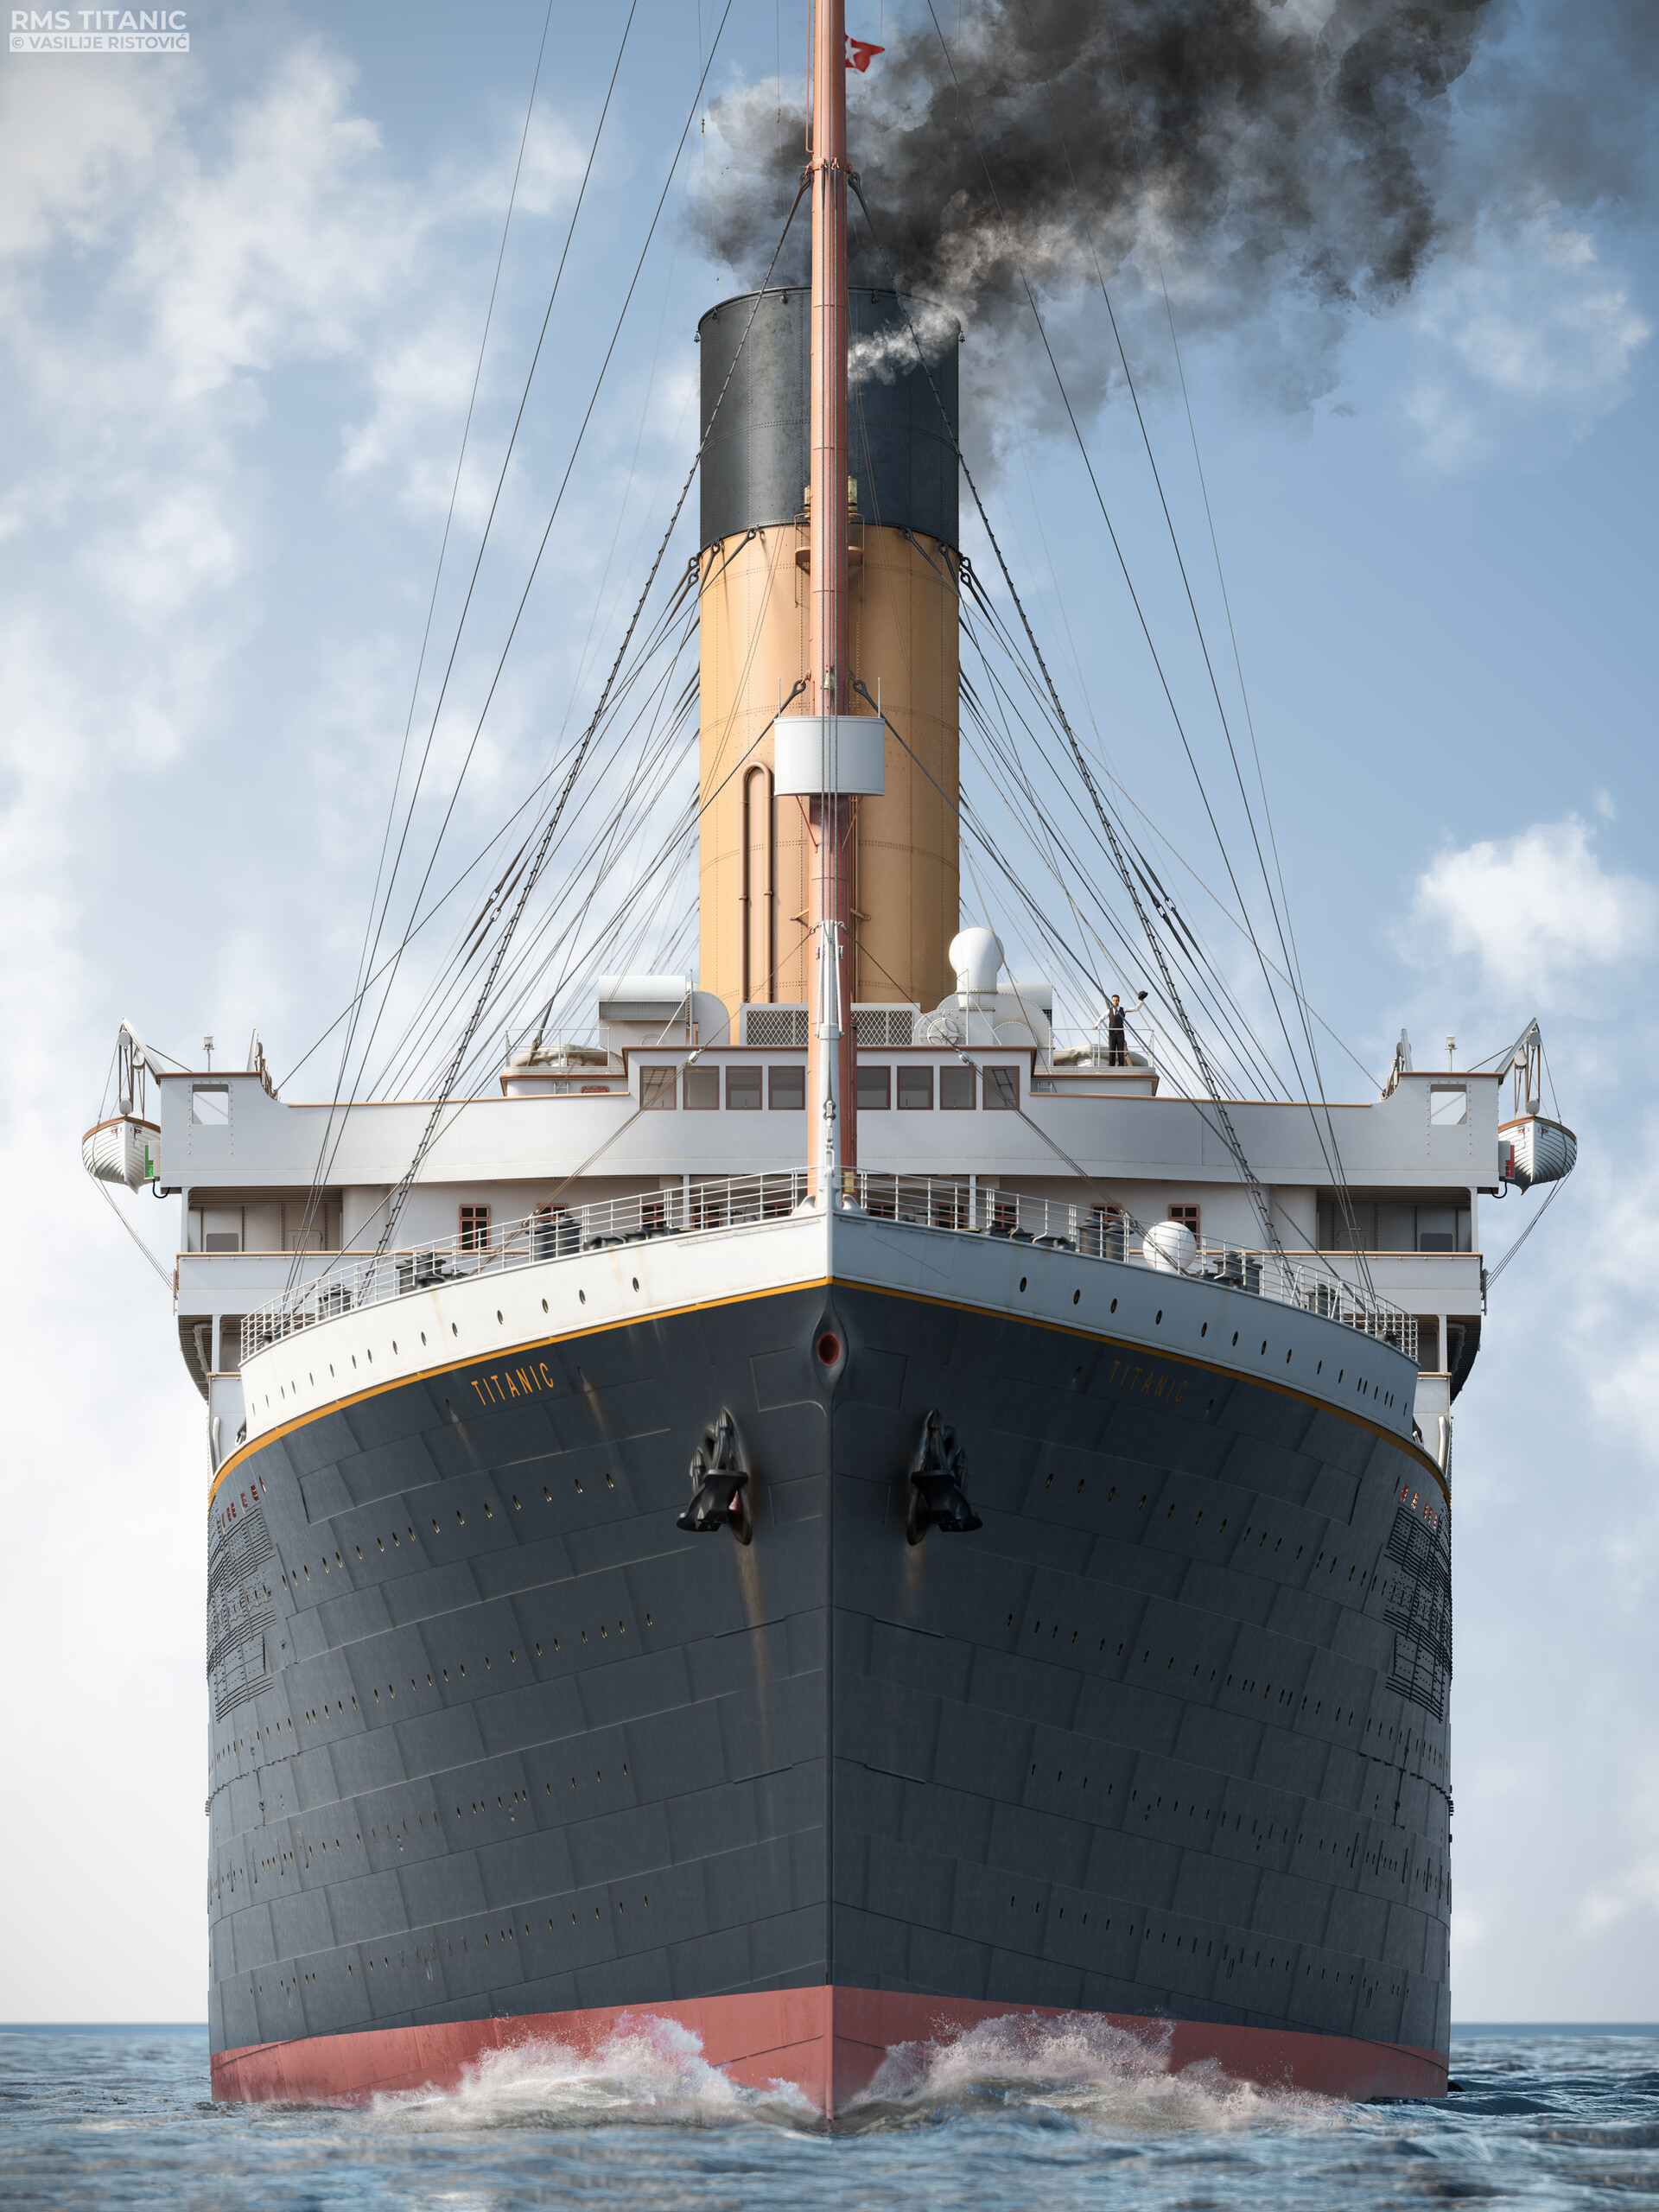 Images Of The Titanic Ship